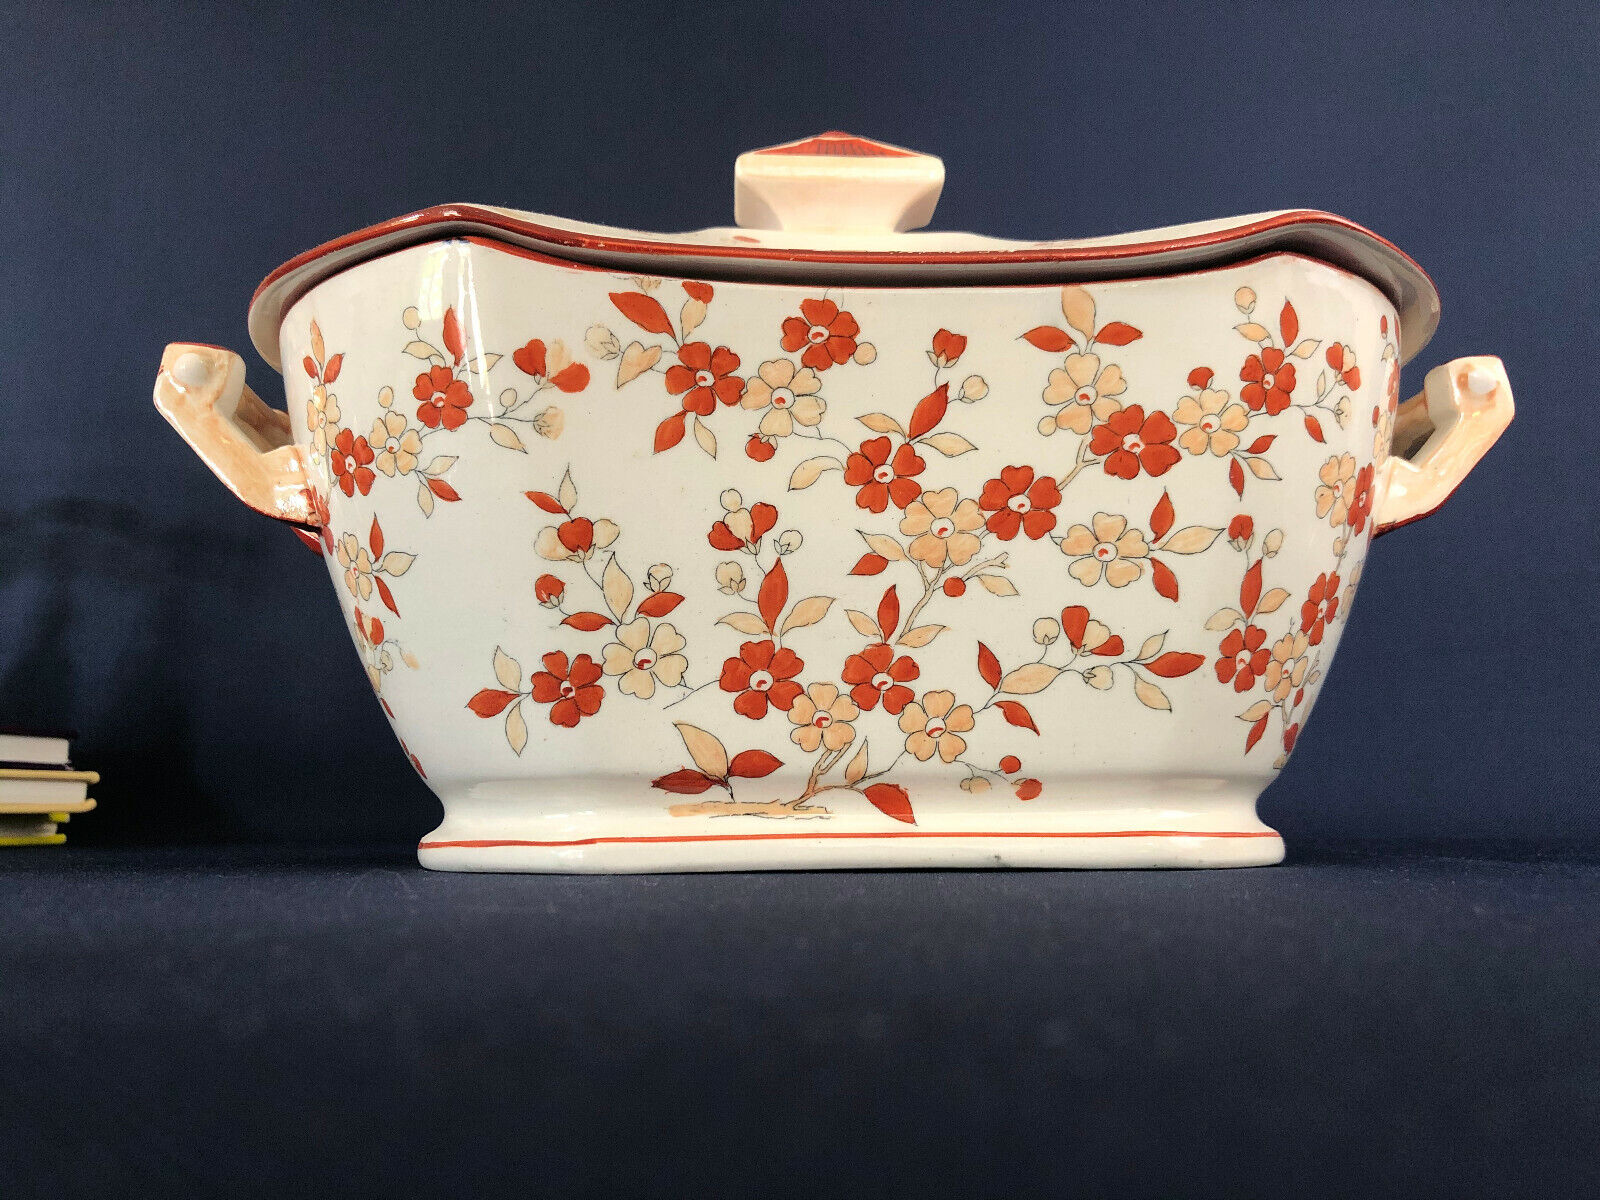 Antique Victorian ceramic or porcelain soup tureen Asian Inspired 1860s 1870s